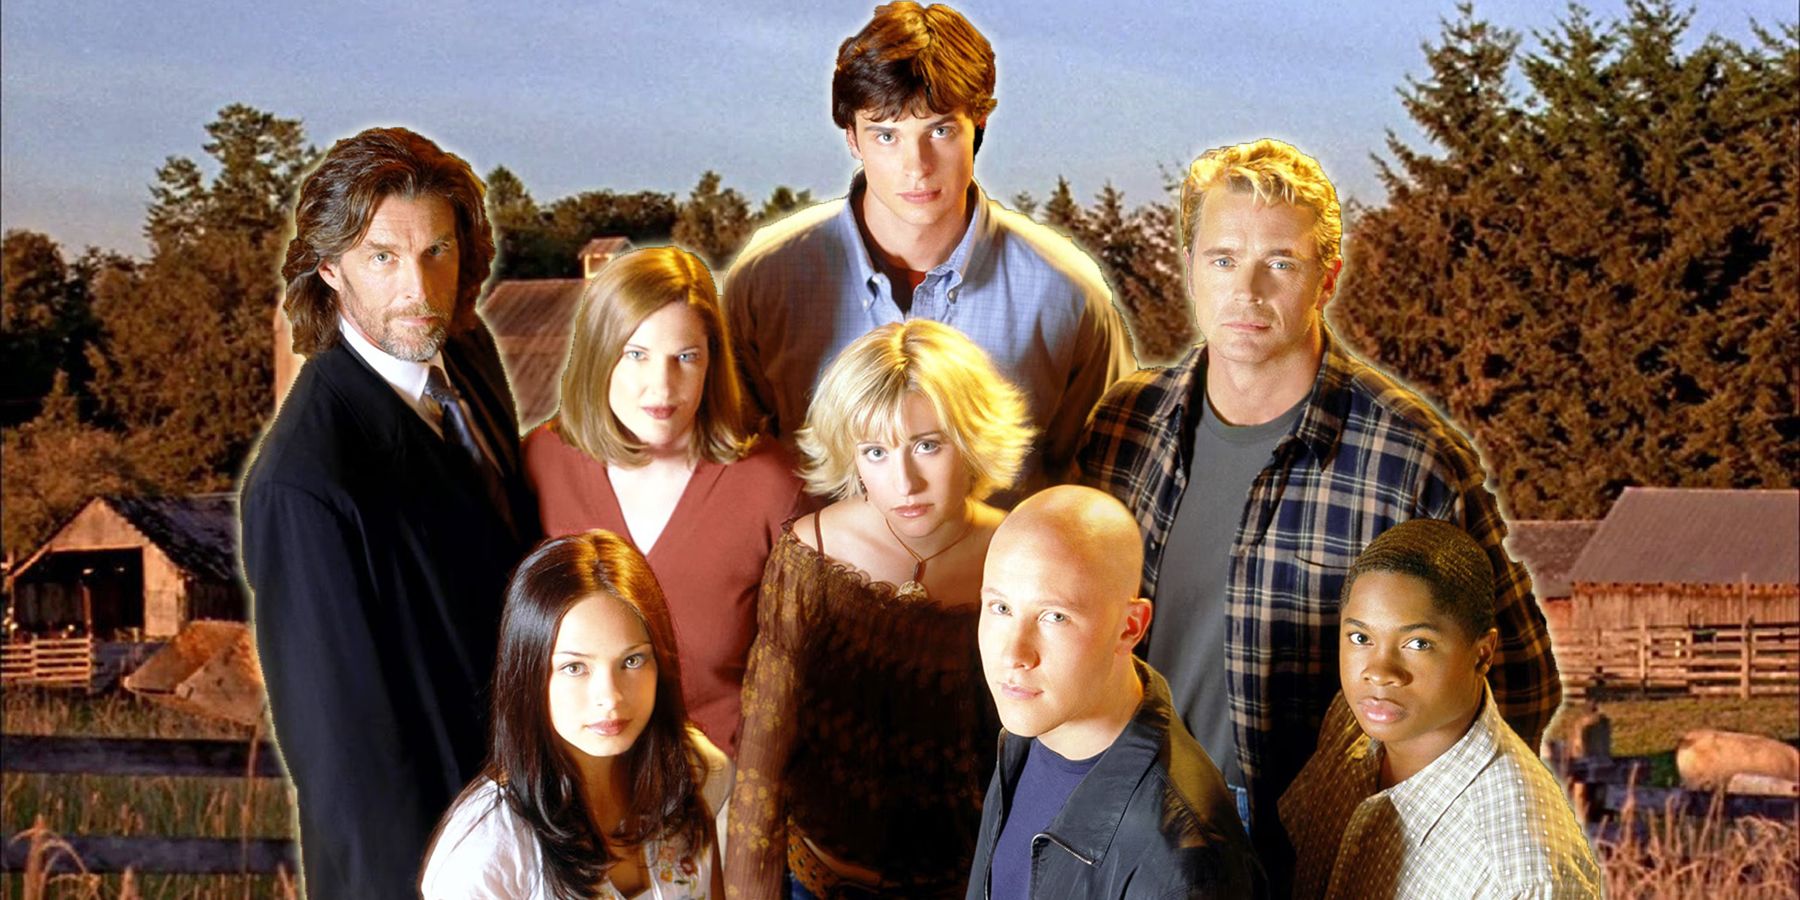 the cast of smallville overlaying the Kent family farm